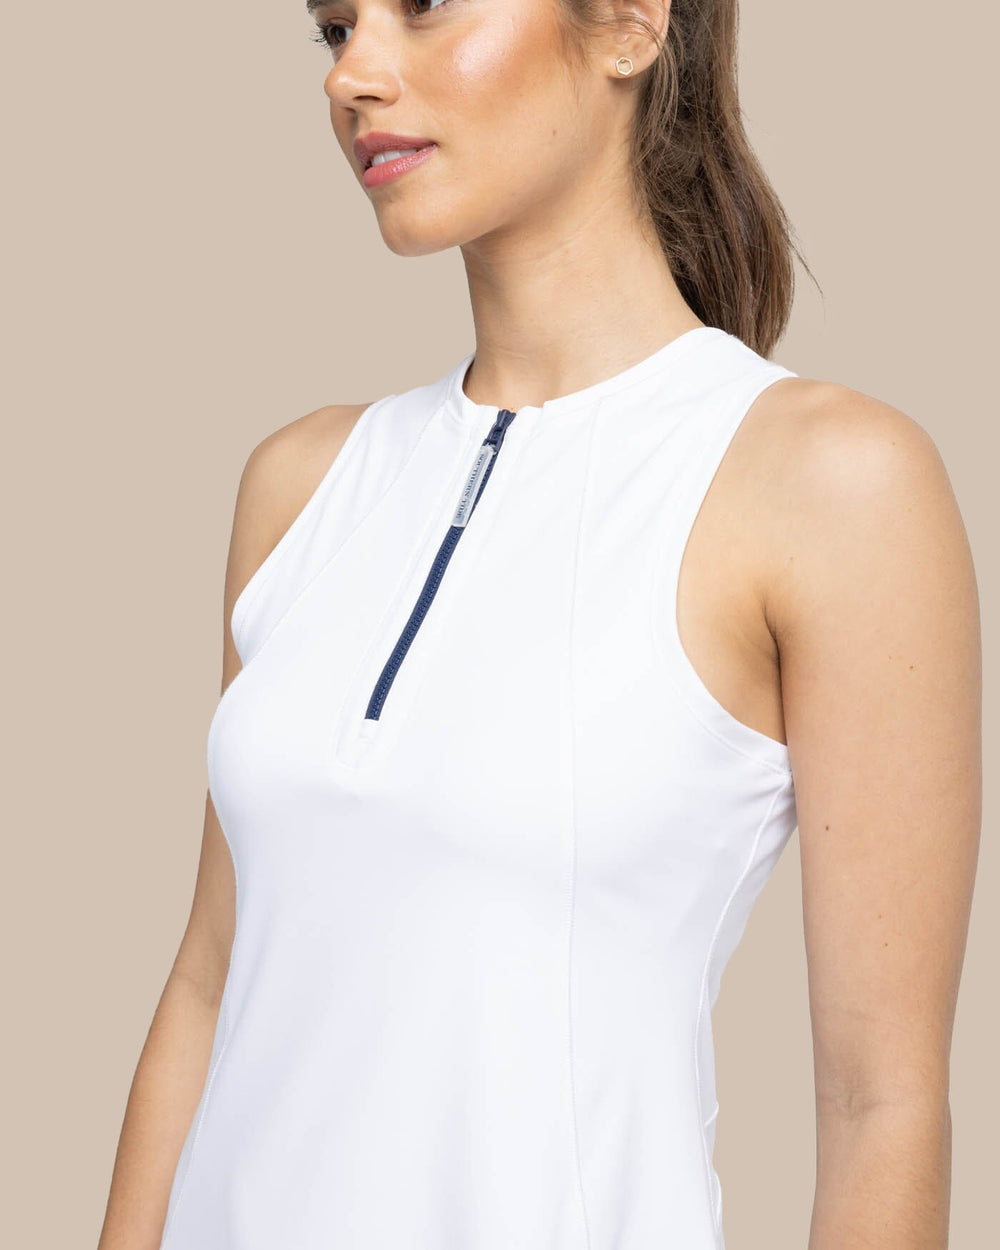 The detail view of the Southern Tide Frances Zip Front Performance Dress by Southern Tide - Classic White